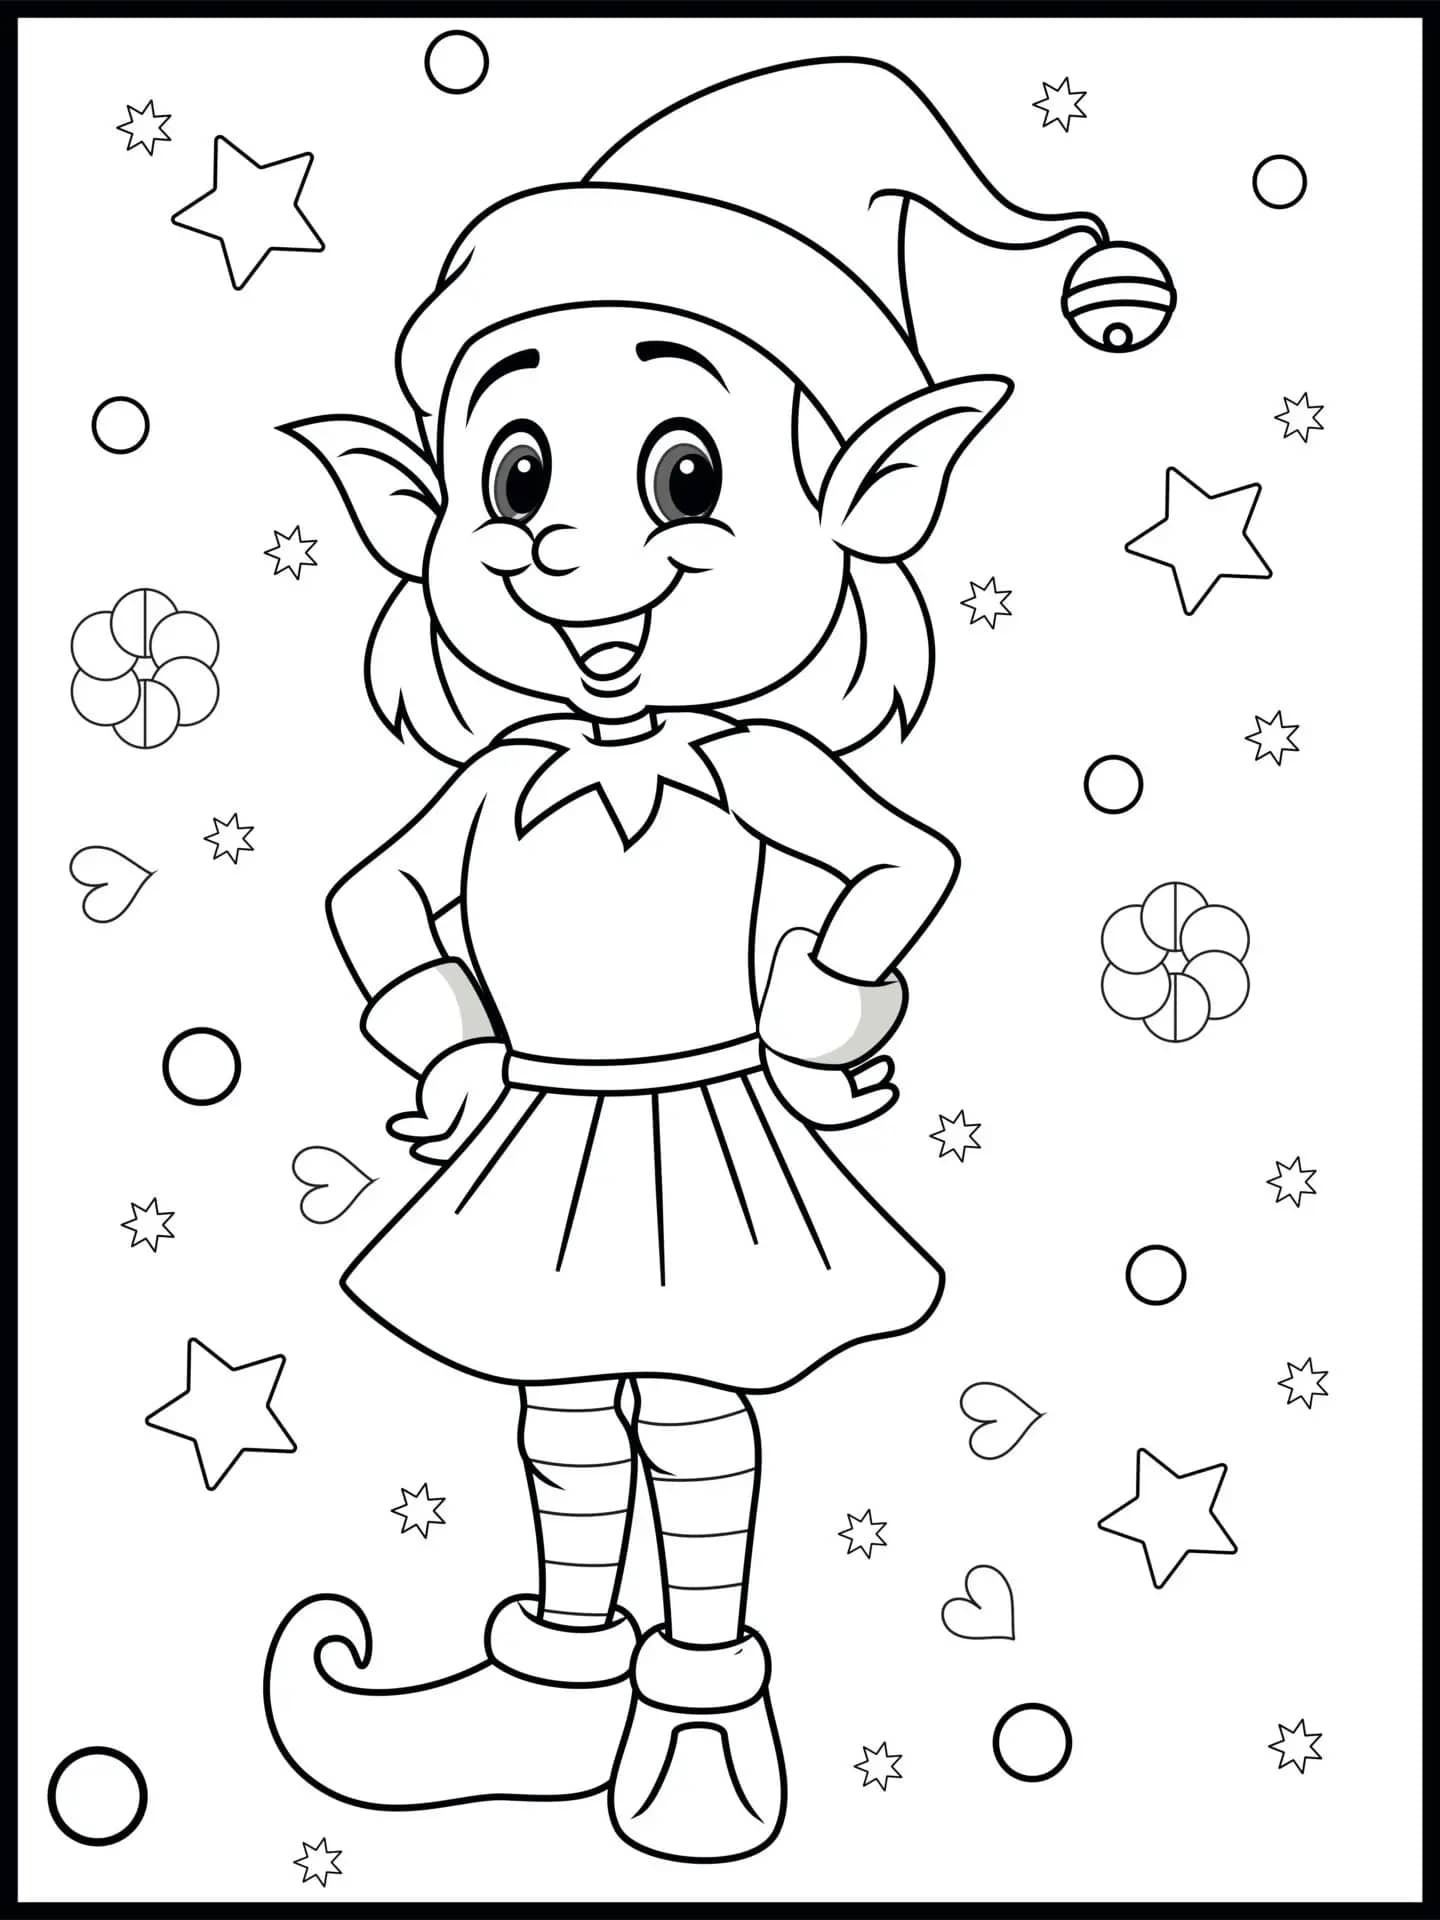 Printable Christmas Coloring Pages Free_81693